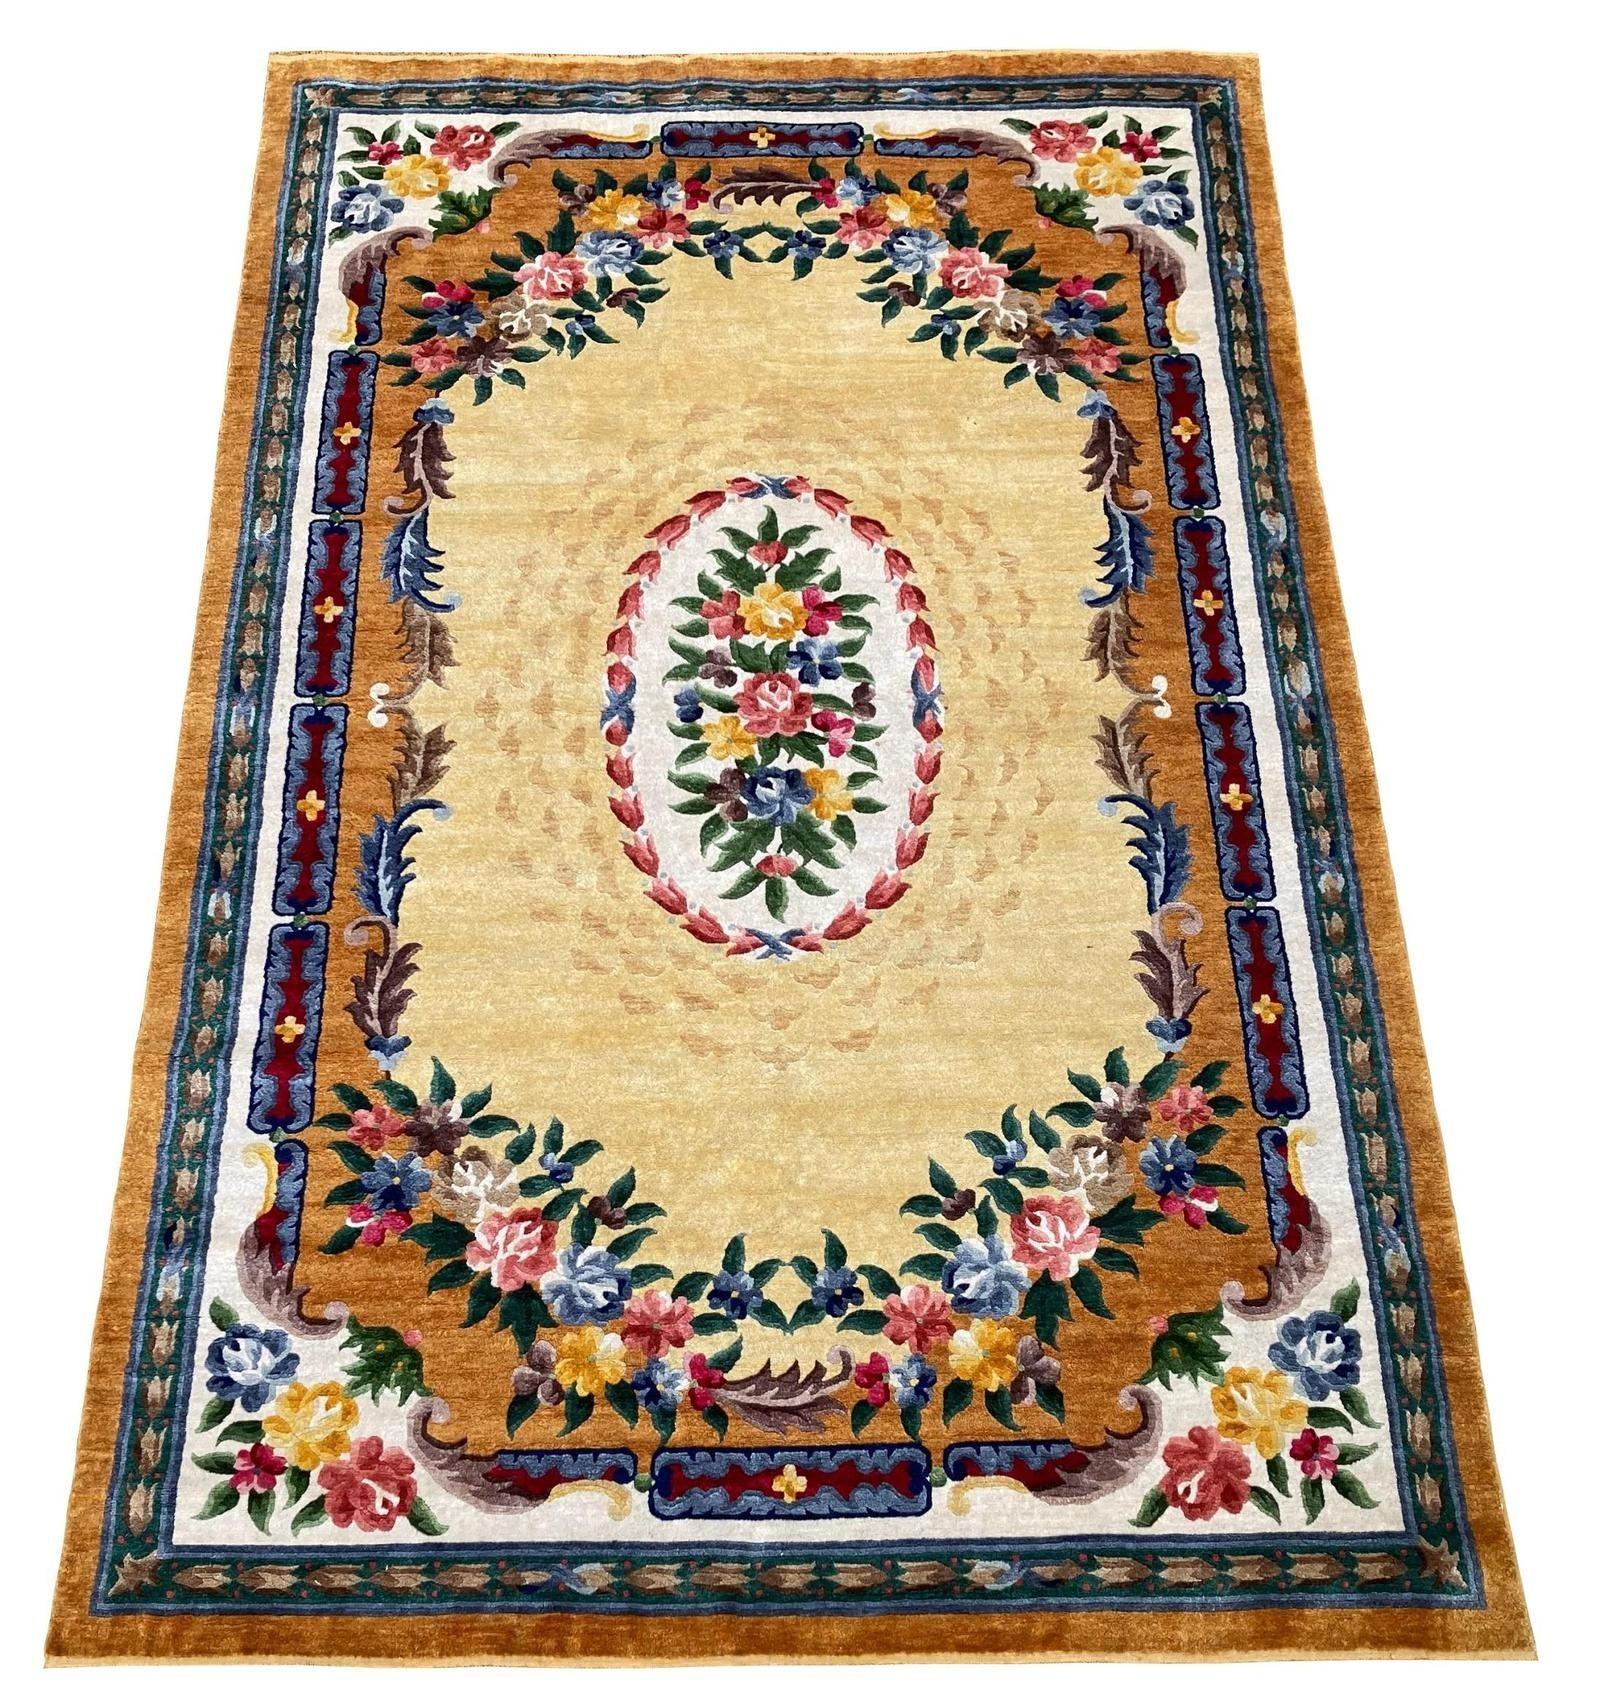 An unusual vintage silk carpet, hand woven in China circa 1950 with a floral Aubusson design on a lemon field and eye catching secondary colours. Note the interesting plaited gold silk fringes. This carpet would have predated the commercial weavings